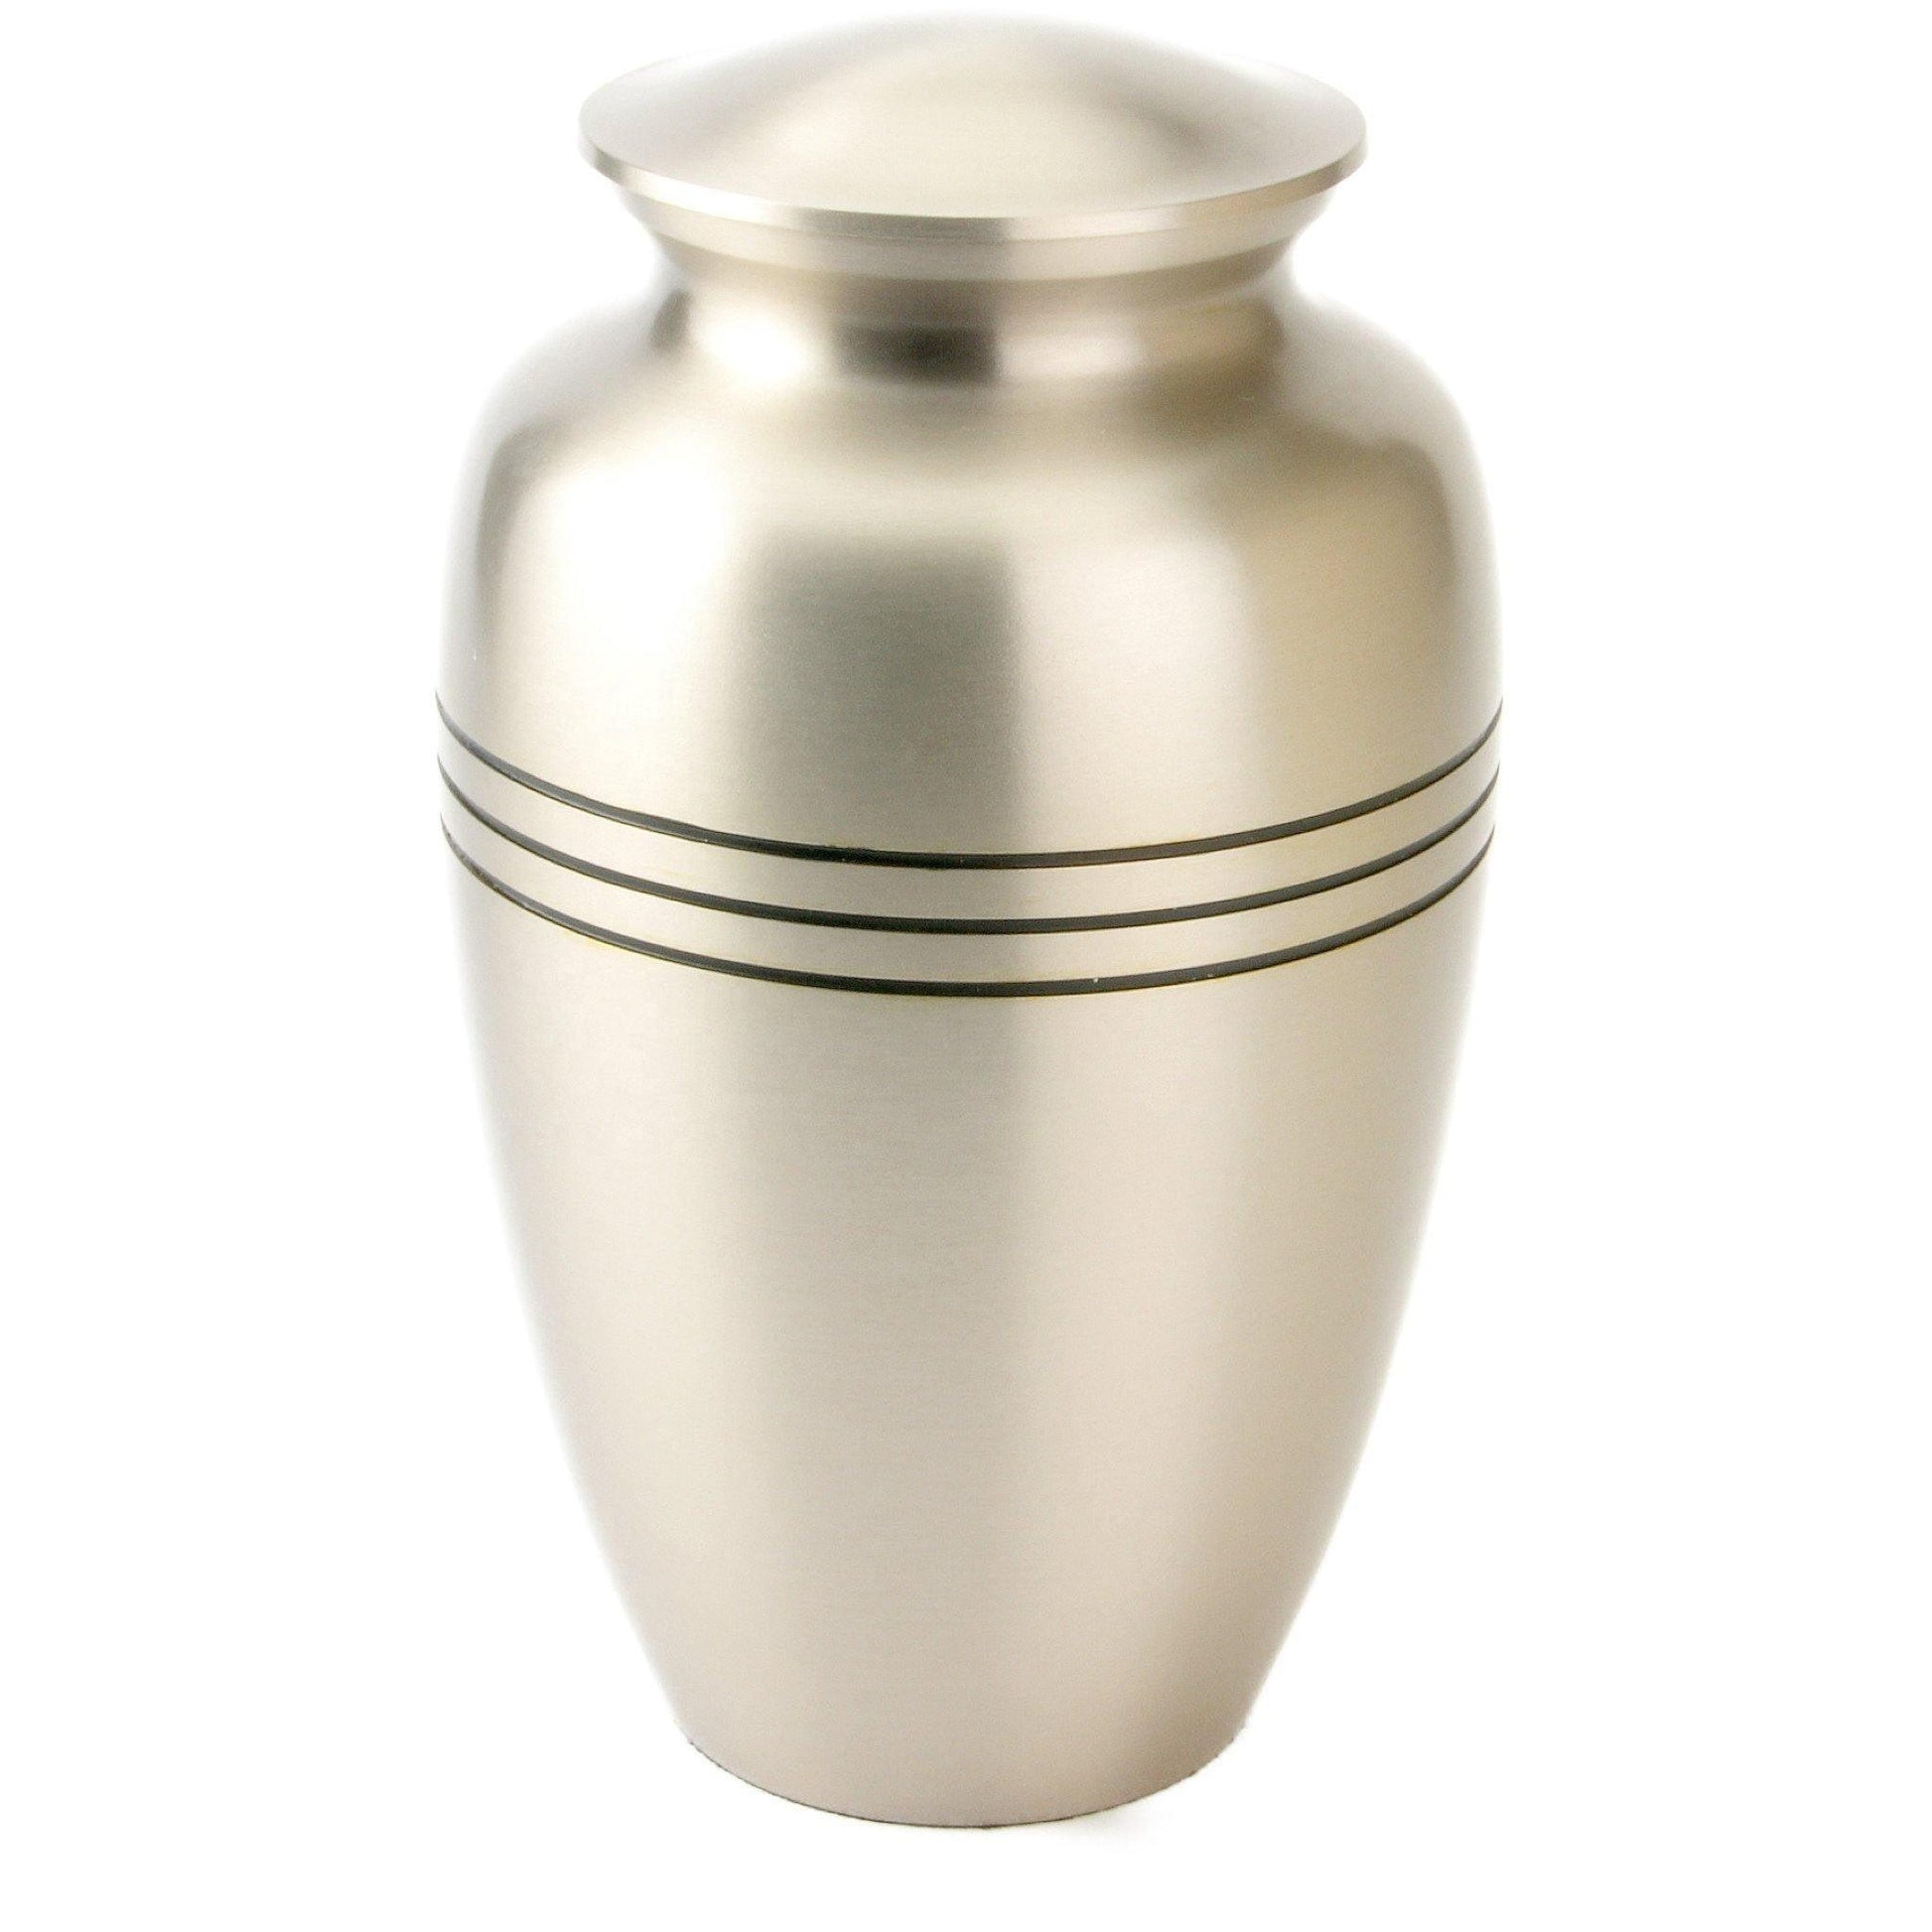 Amor Adult Ashes Urn-Adult Urn for Ashes-Cremation Urns- The cremation urns for ashes and keepsakes for ashes come in a variety of styles to suit most tastes, decor and different volumes of funeral ashes.